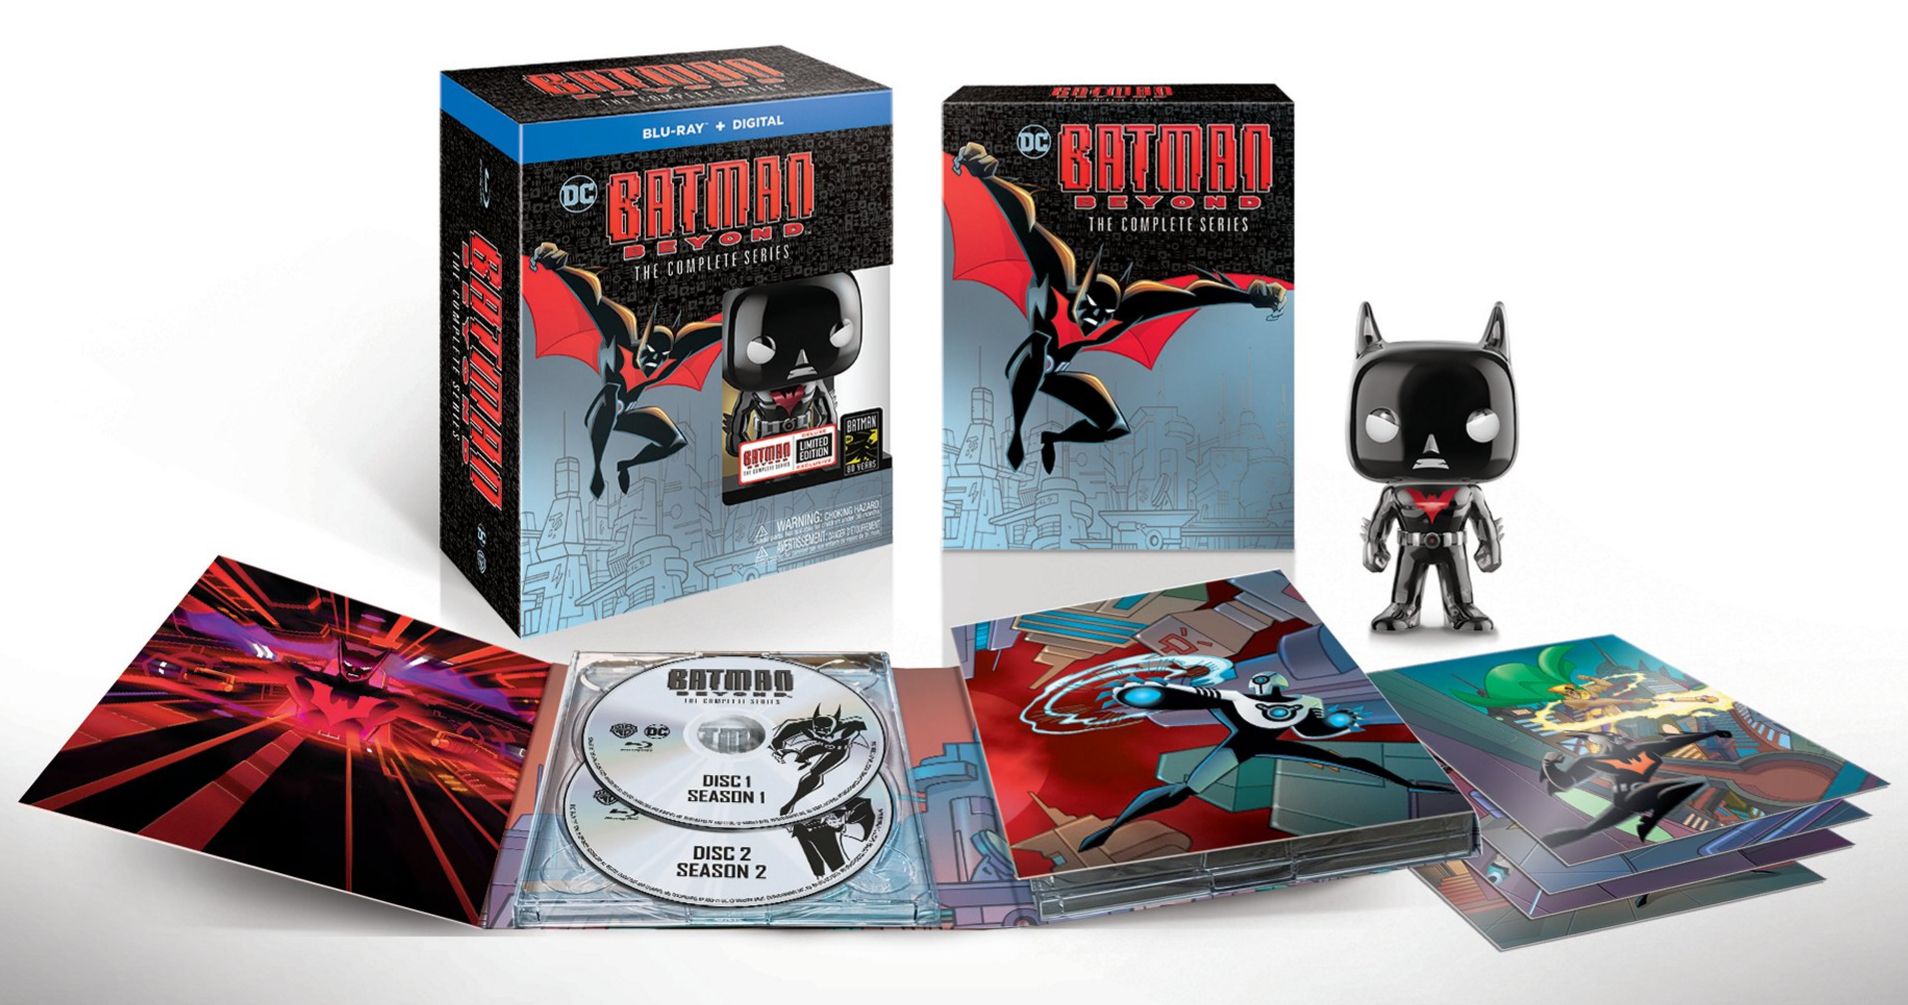 Batman Beyond Complete Series Limited Edition Blu-ray Announced at Comic-Con